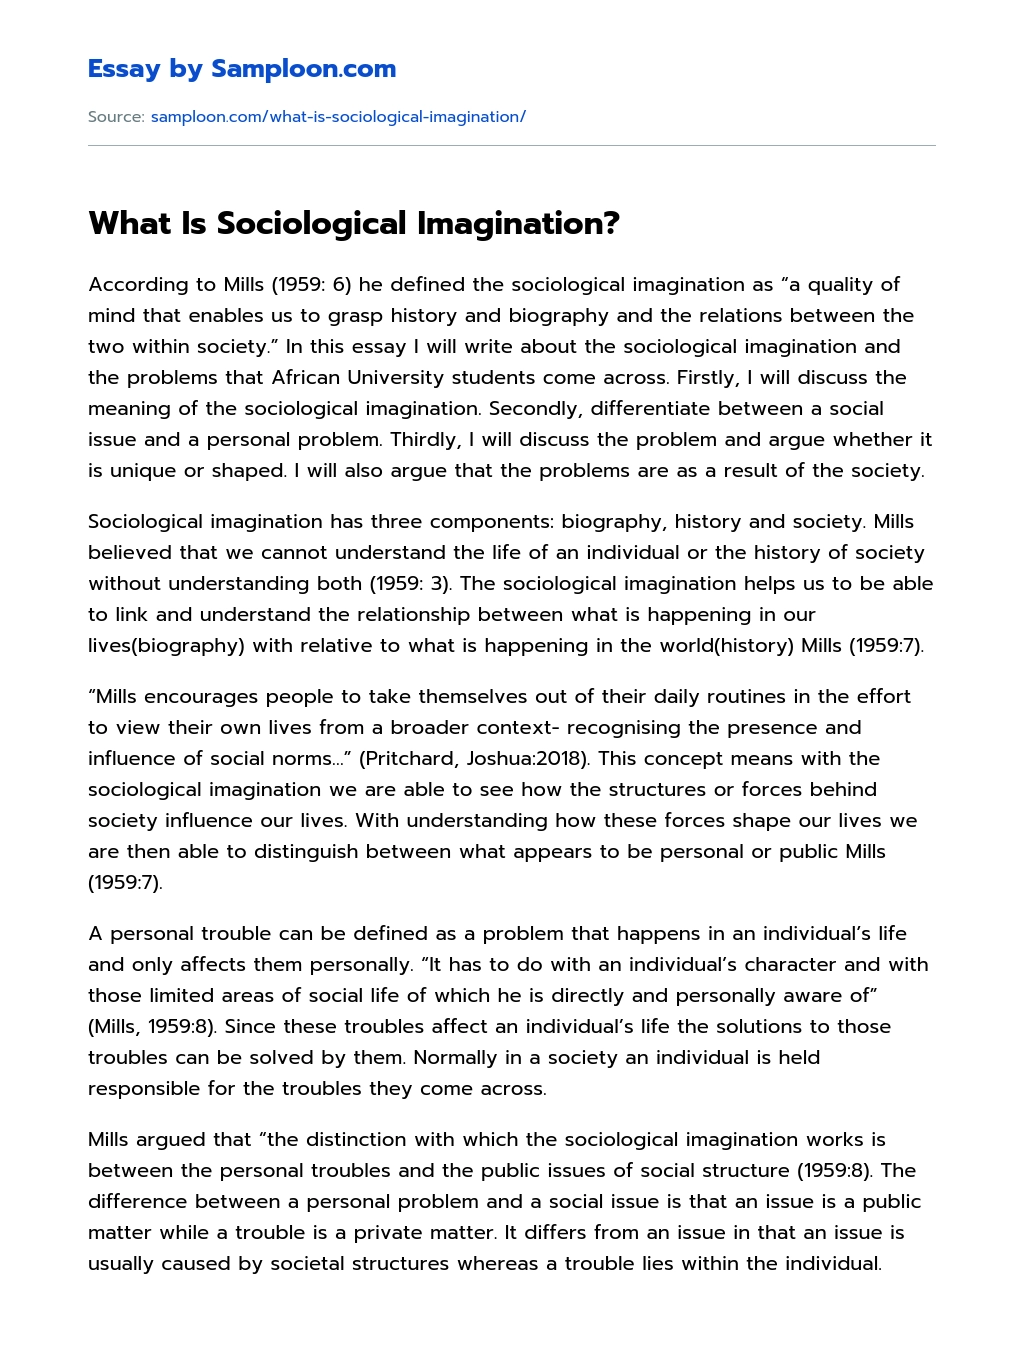 What Is Sociological Imagination? essay